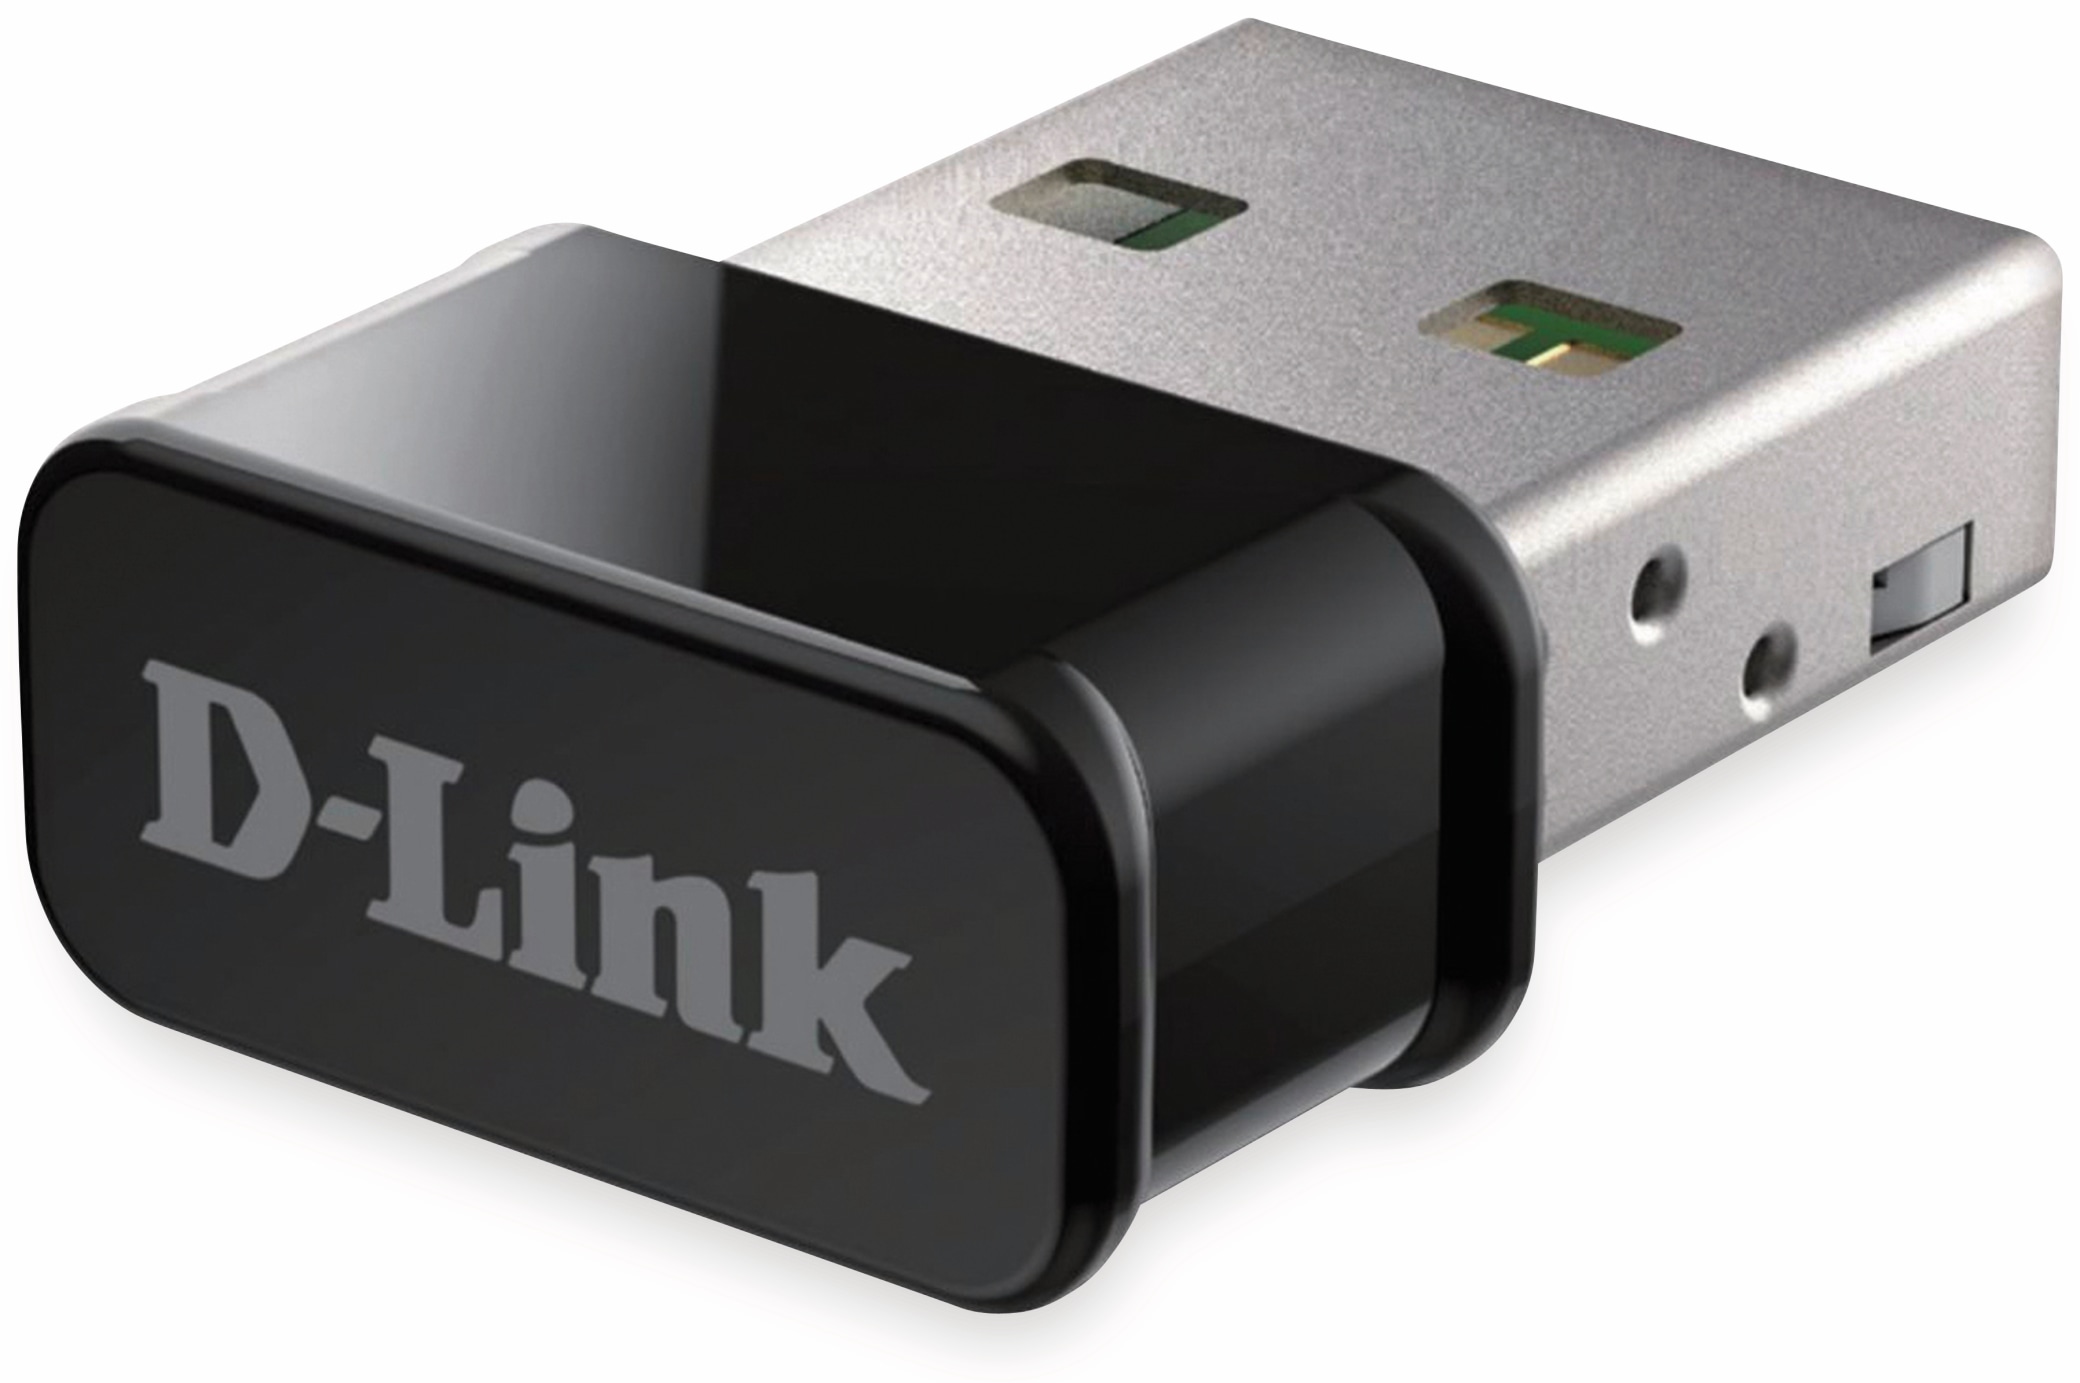 D-Link WLAN USB-Adapter DWA-181, MIMO, 5 GHz